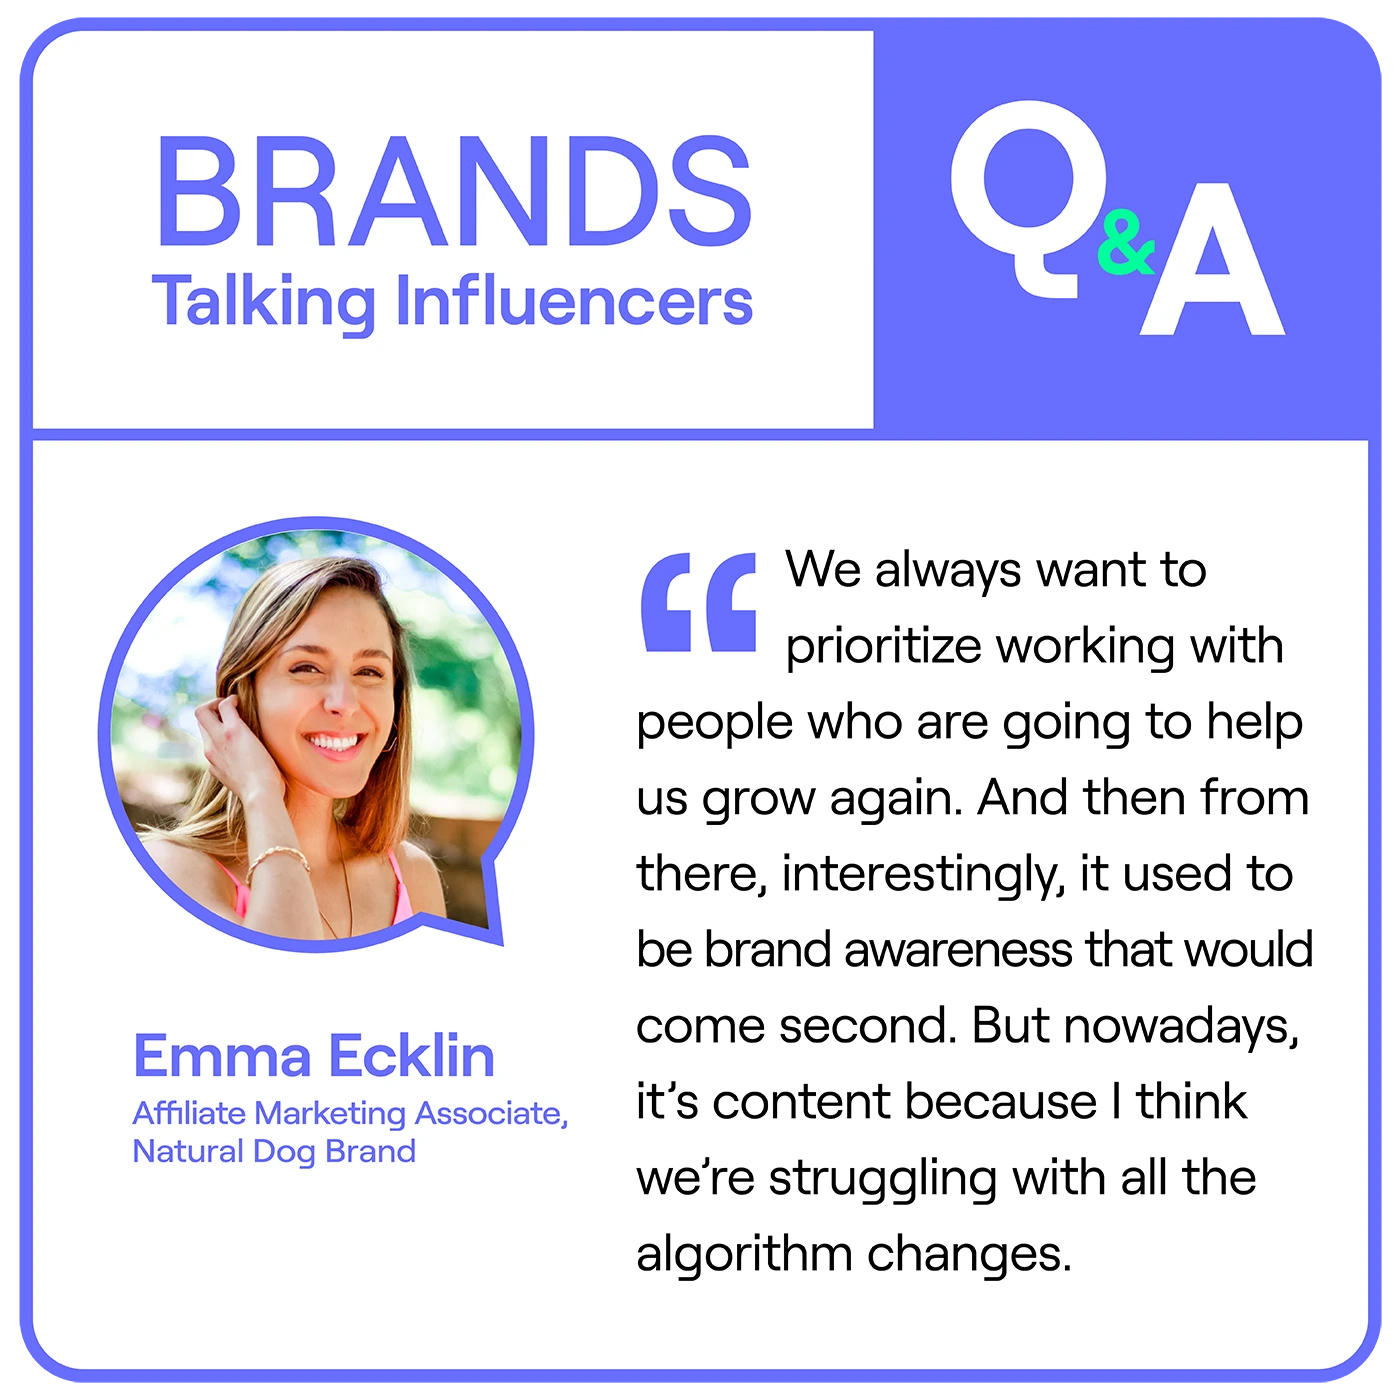 Brands Talking Influencers Q&A quote image w/ Emma Ecklin potrtrait & quote on her influencer marketing program